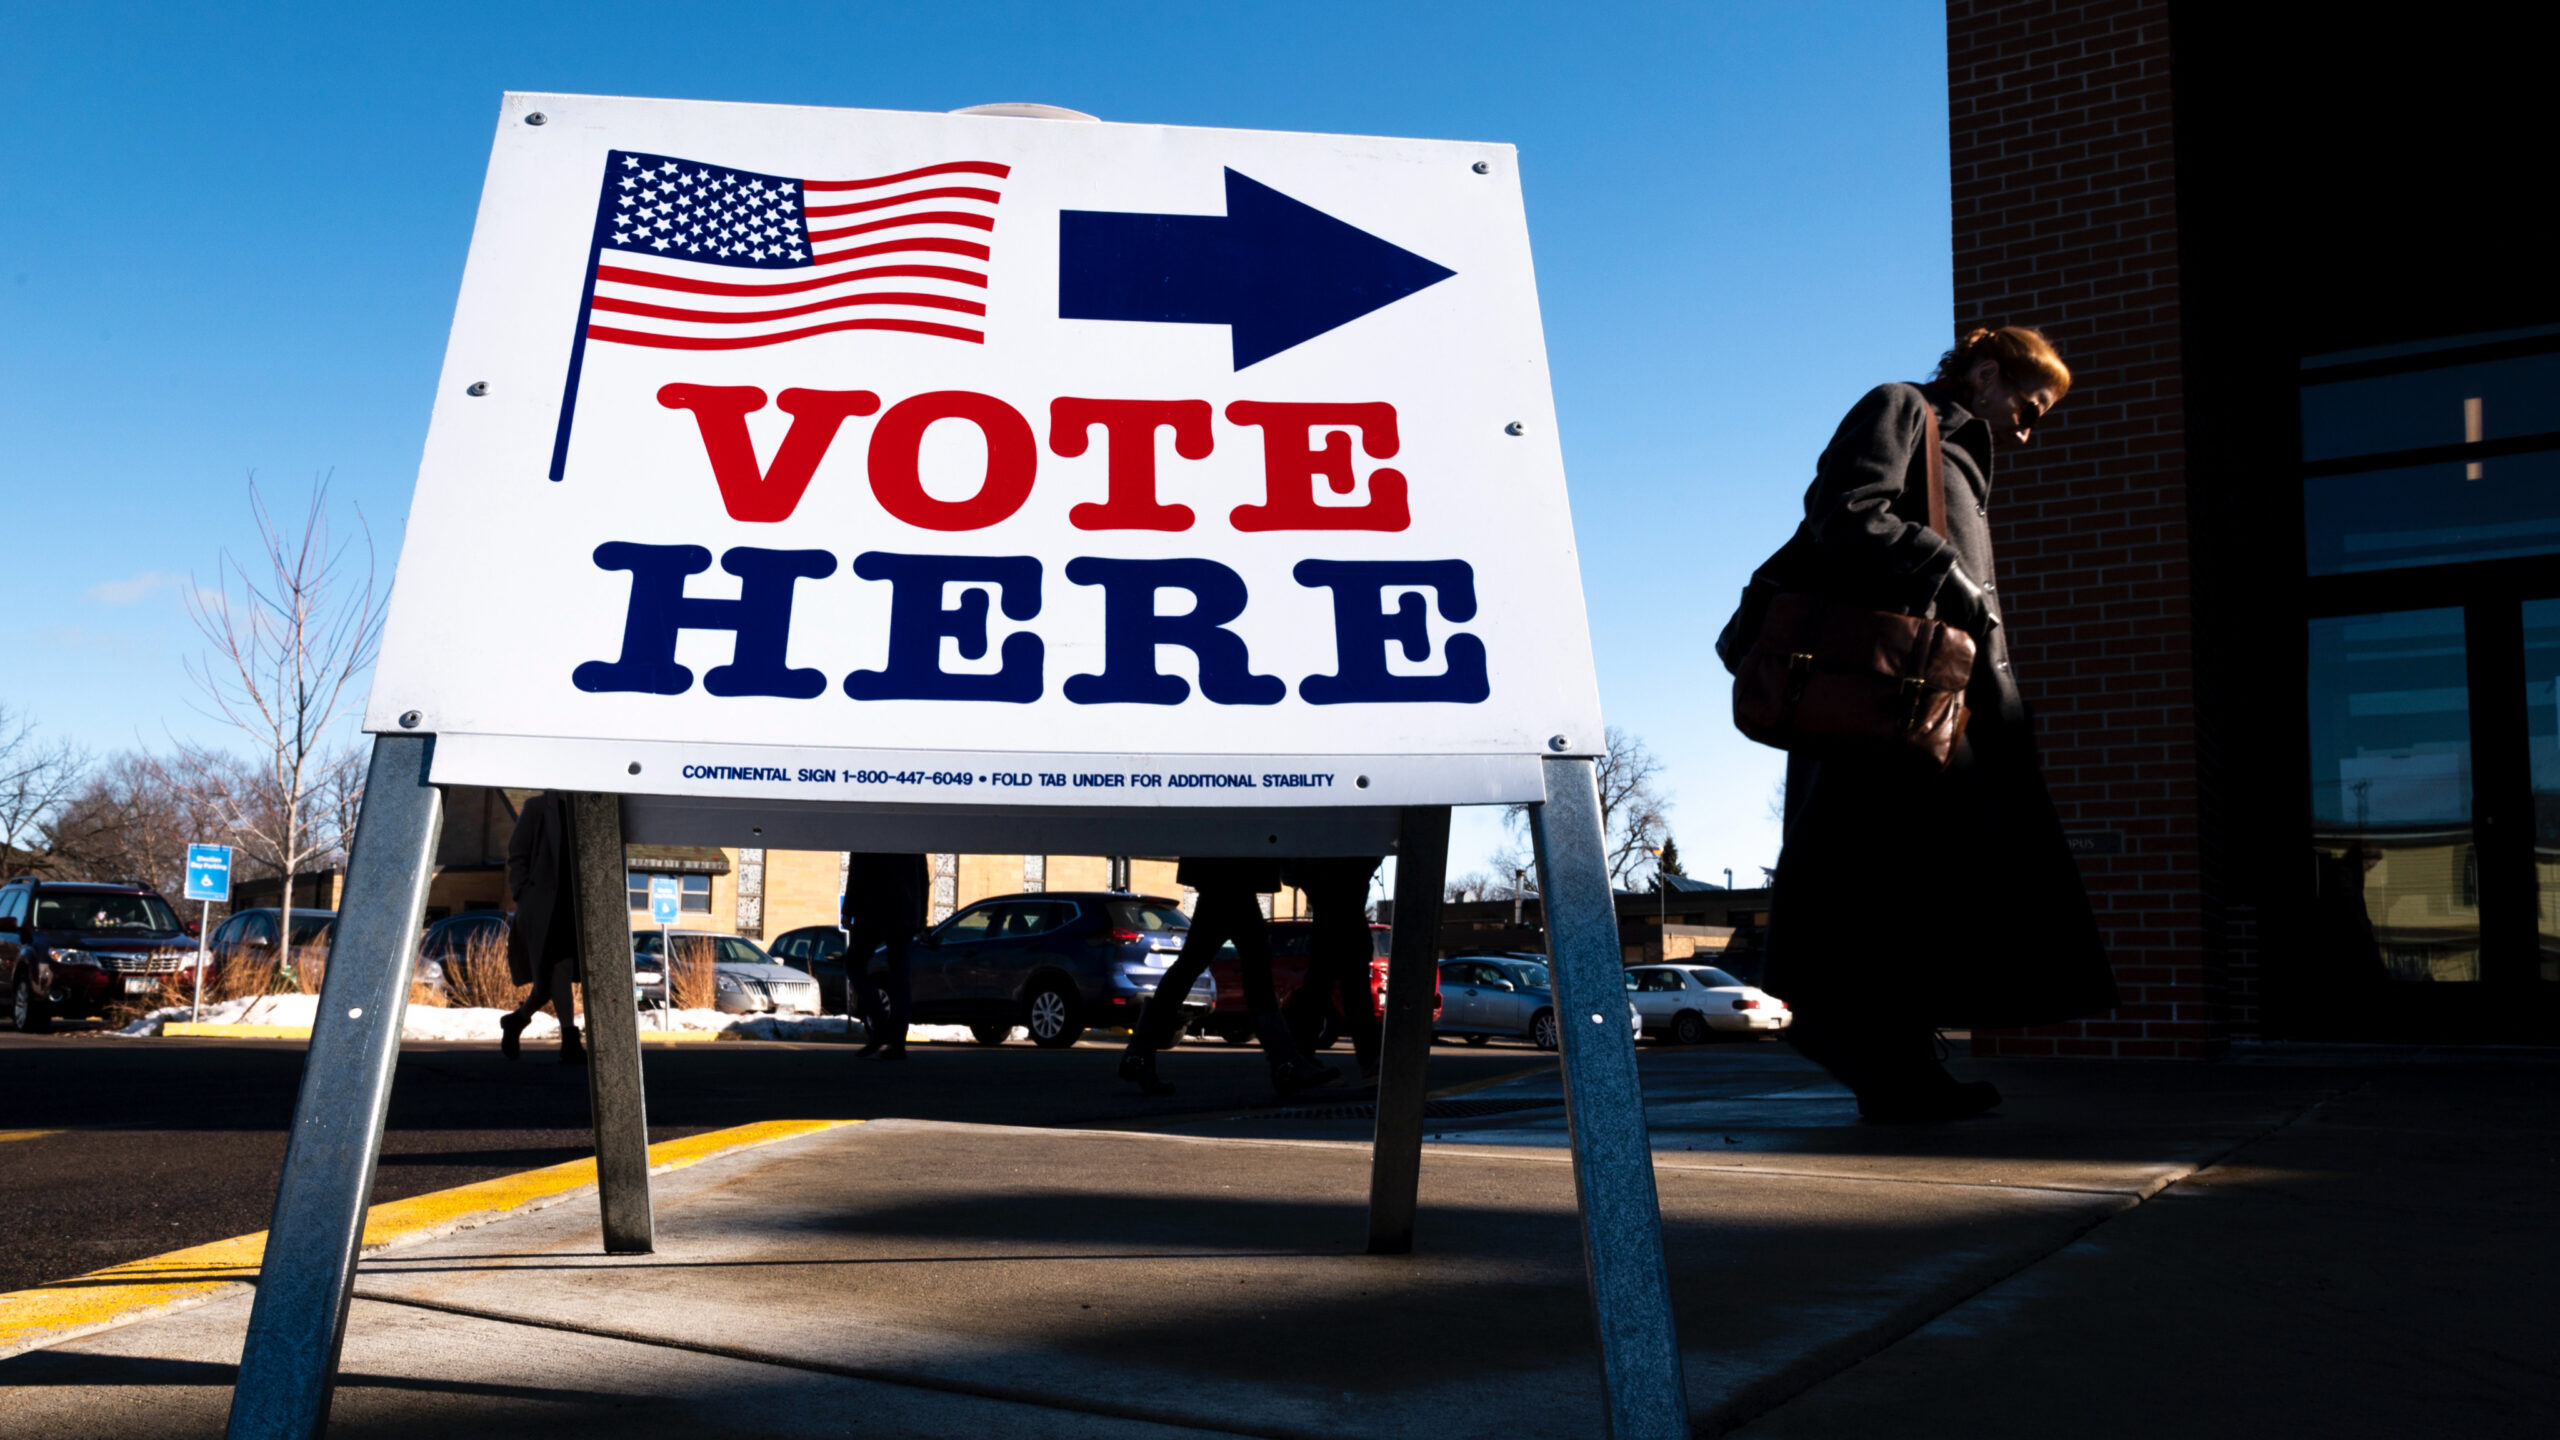 Minors in New Jersey’s largest city now have voting rights